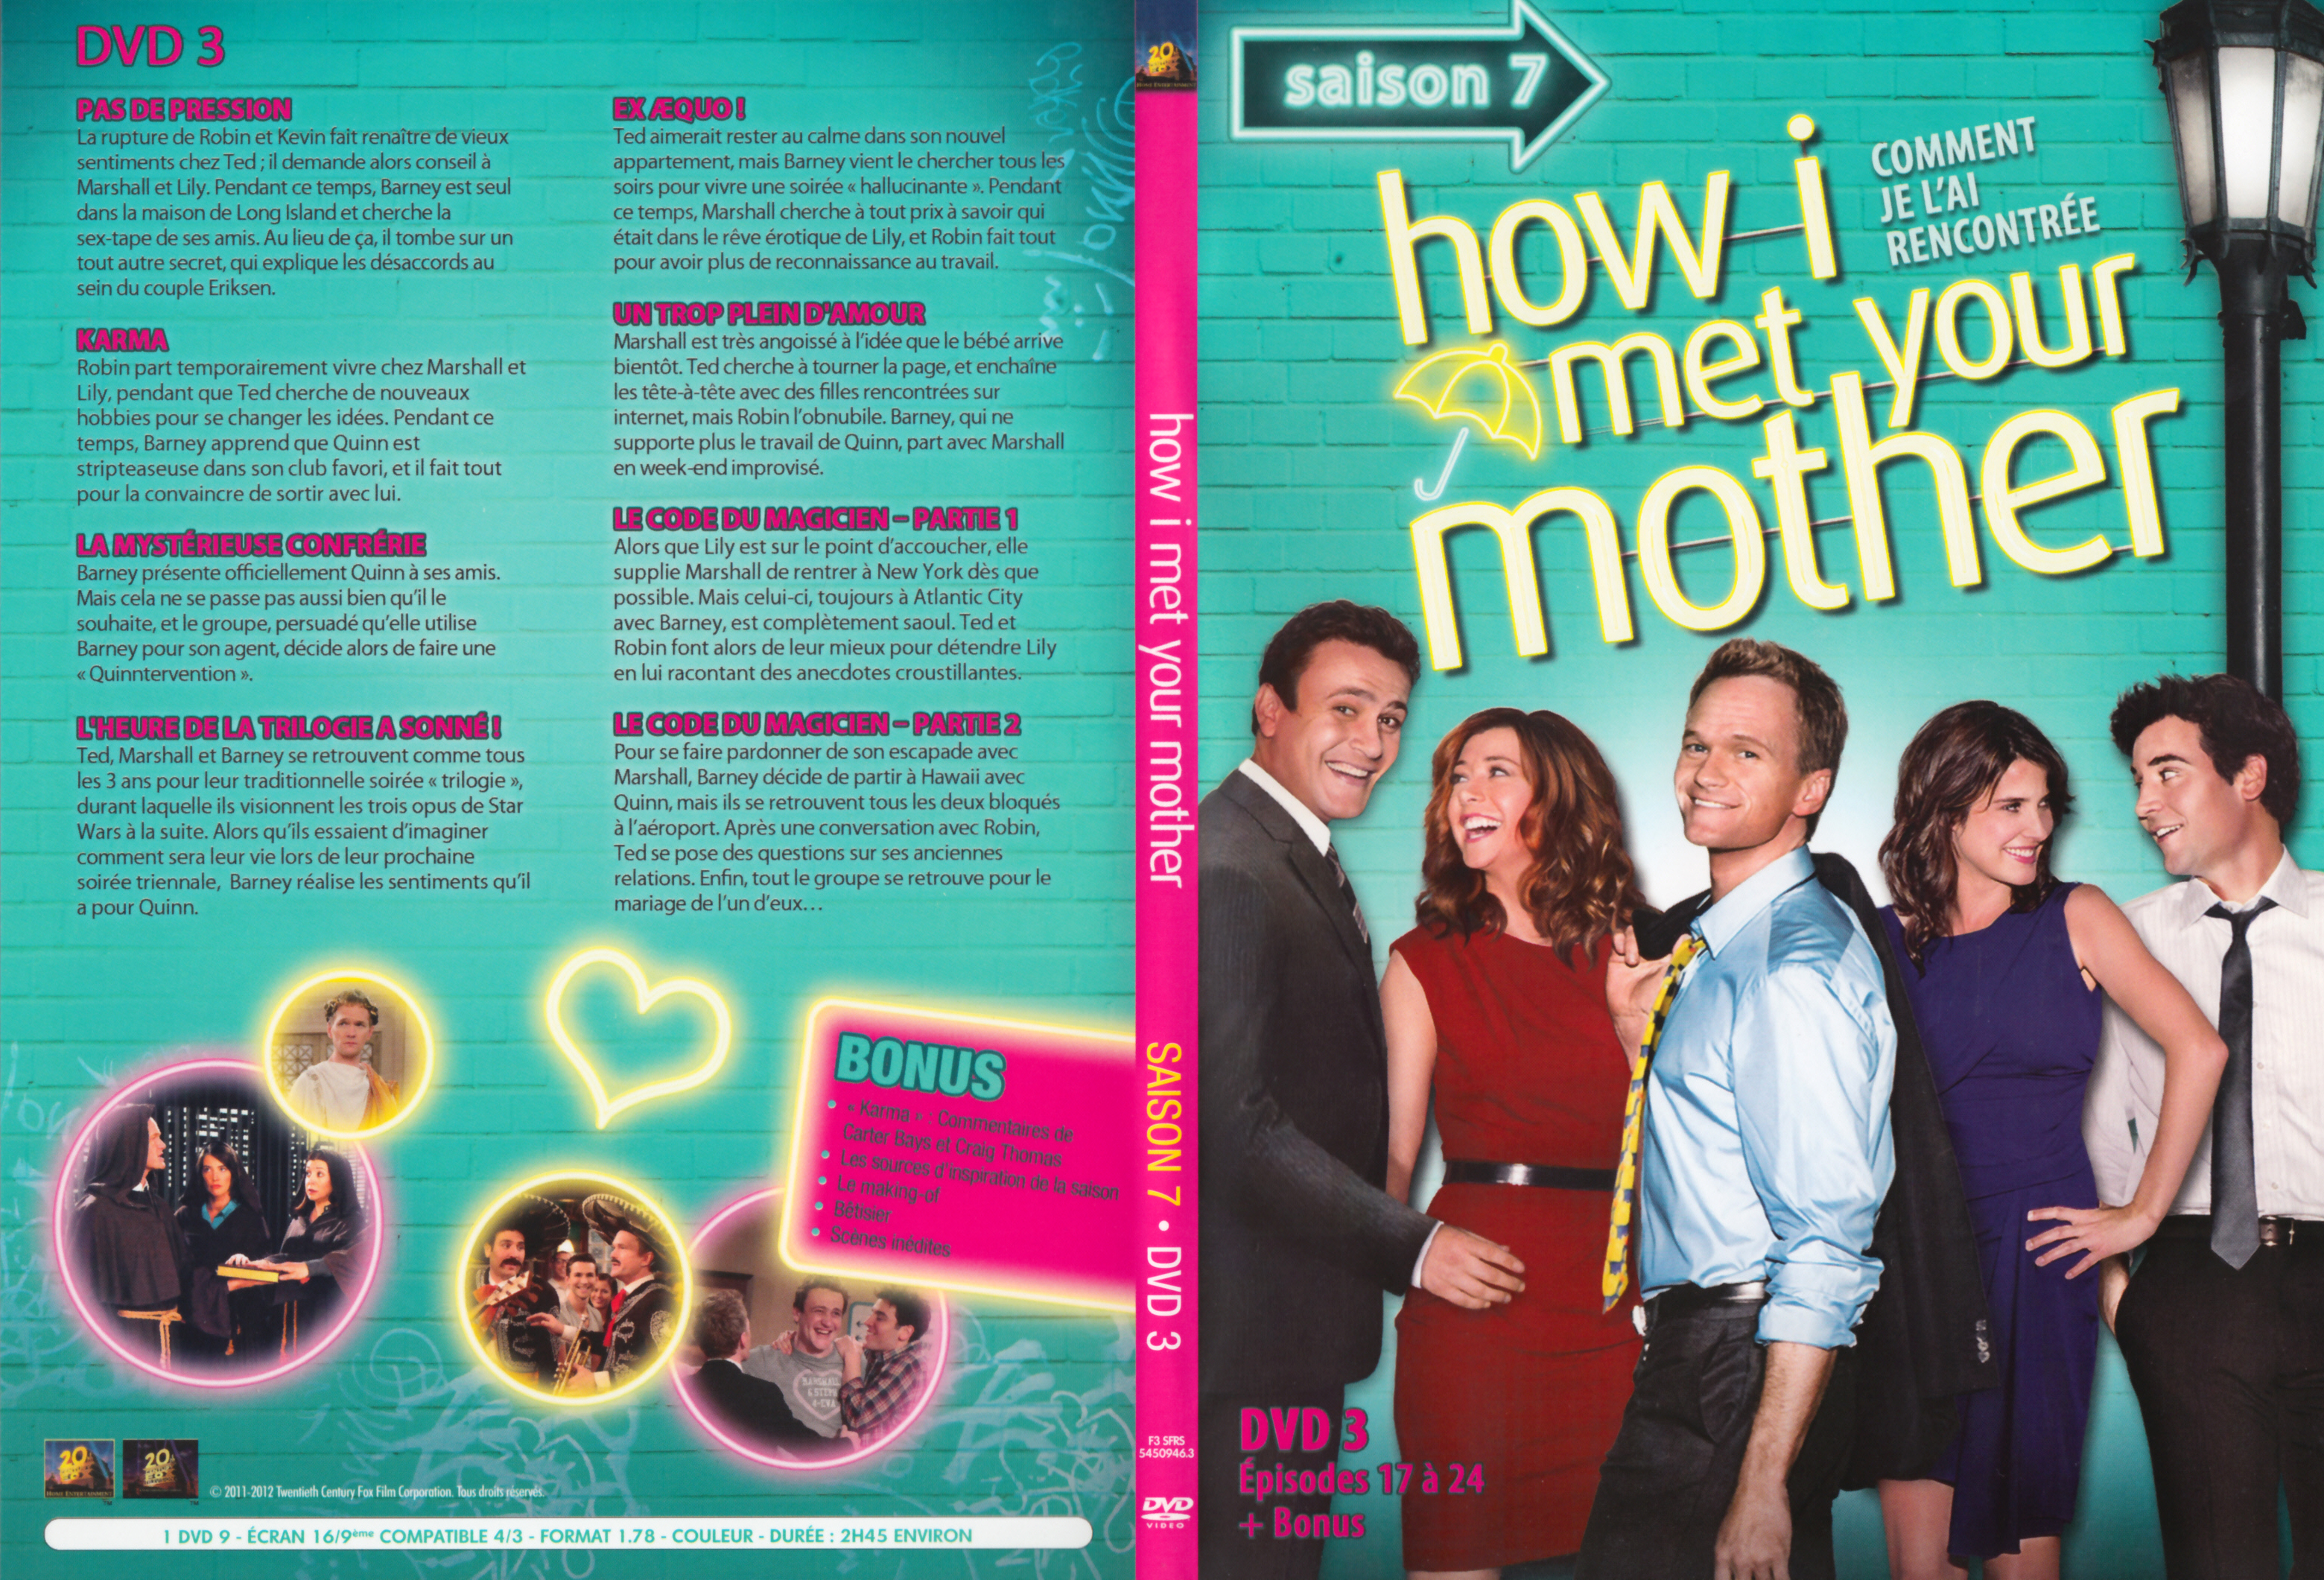 Jaquette DVD How i met your mother Saison 7 DVD 3